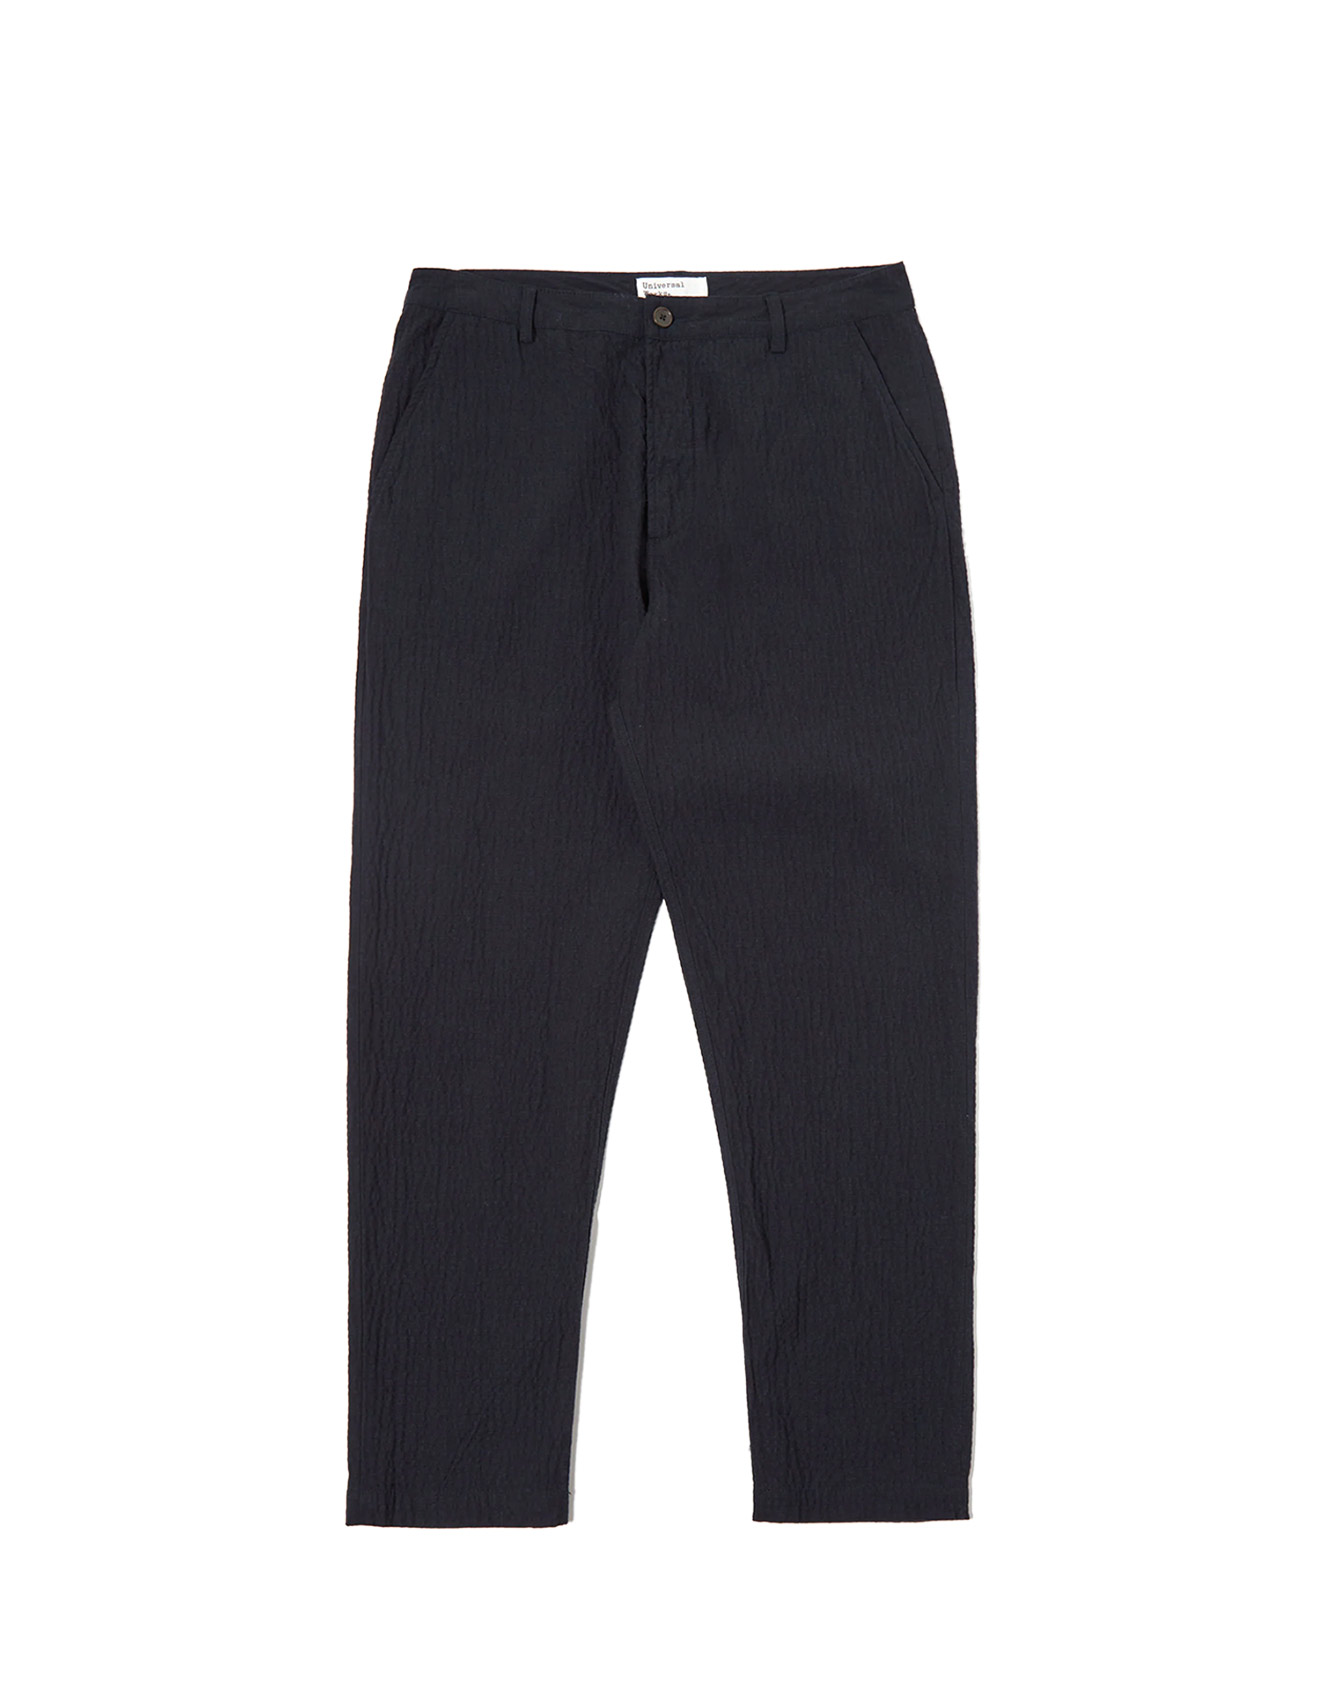 UNIVERSAL WORKS – Oxford Pant Ospina Cotton